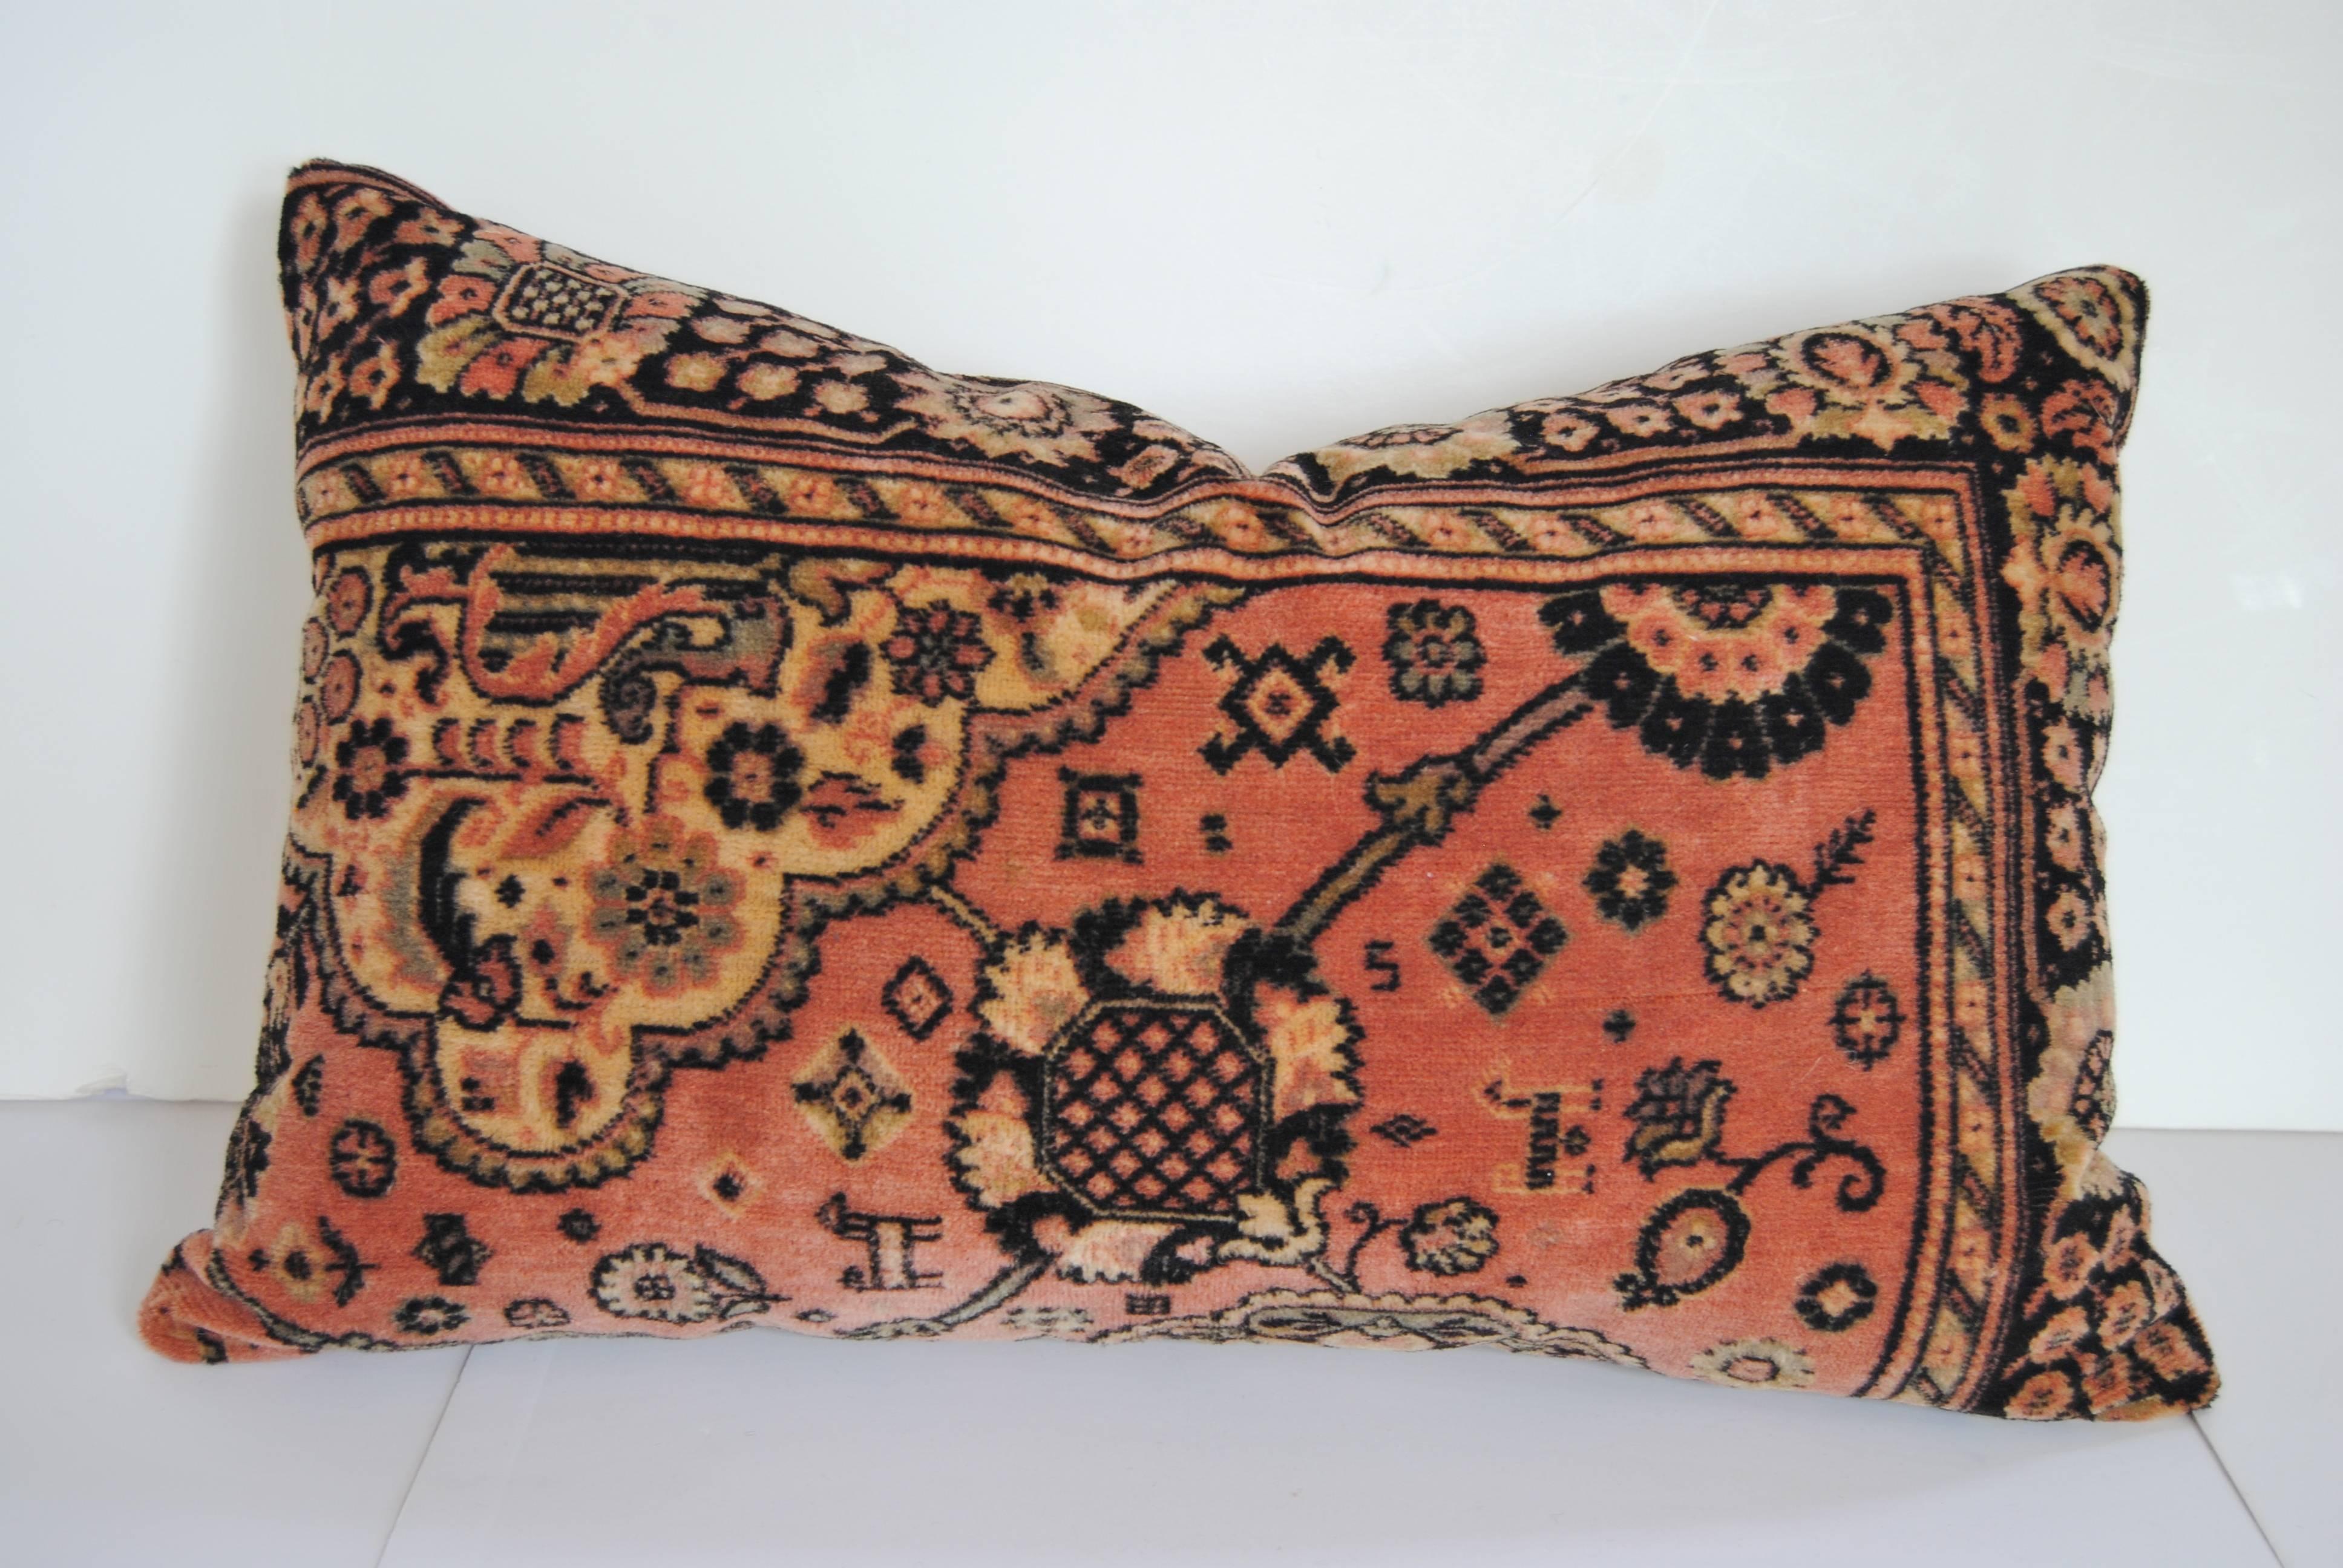 Custom pillow cut from a wool mohair cloth fro the Netherlands, early 1900's.  The textile has a soft hand  with good color, salmon, black cream and a touch of green.  The design was patterned after the oriental rugs and used over the dining table